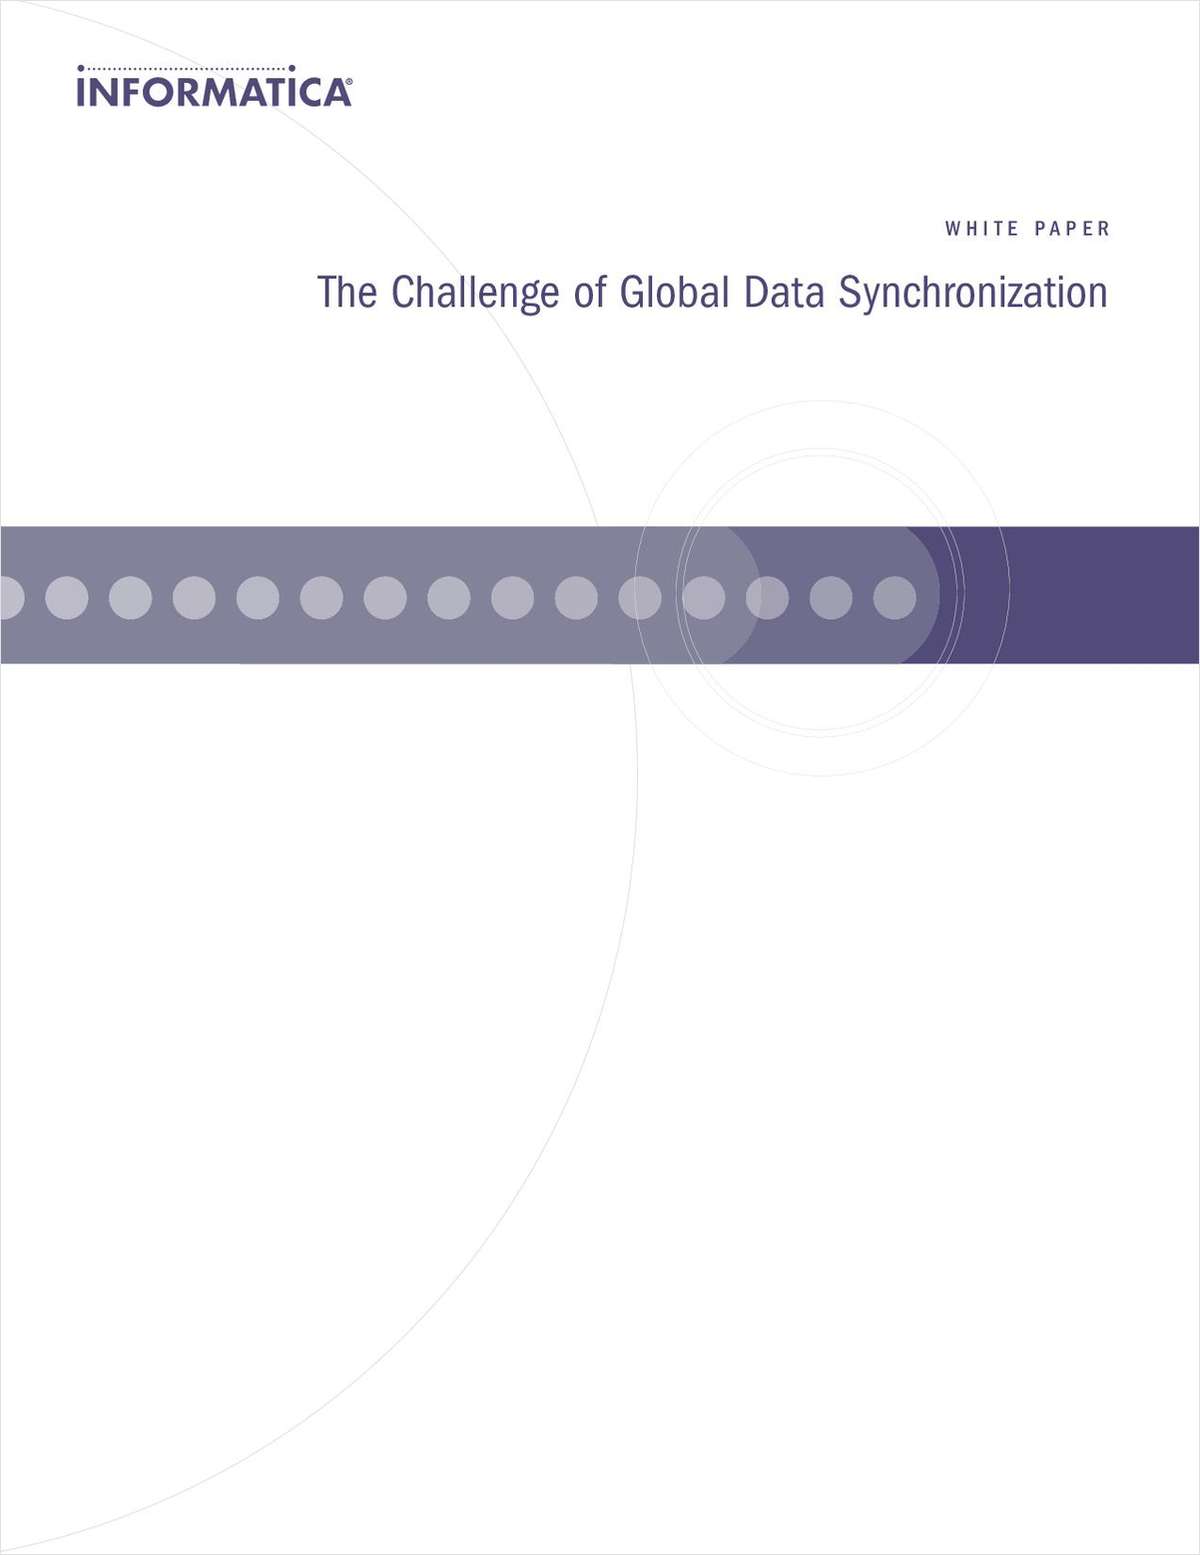 The Challenge of Global Data Synchronization